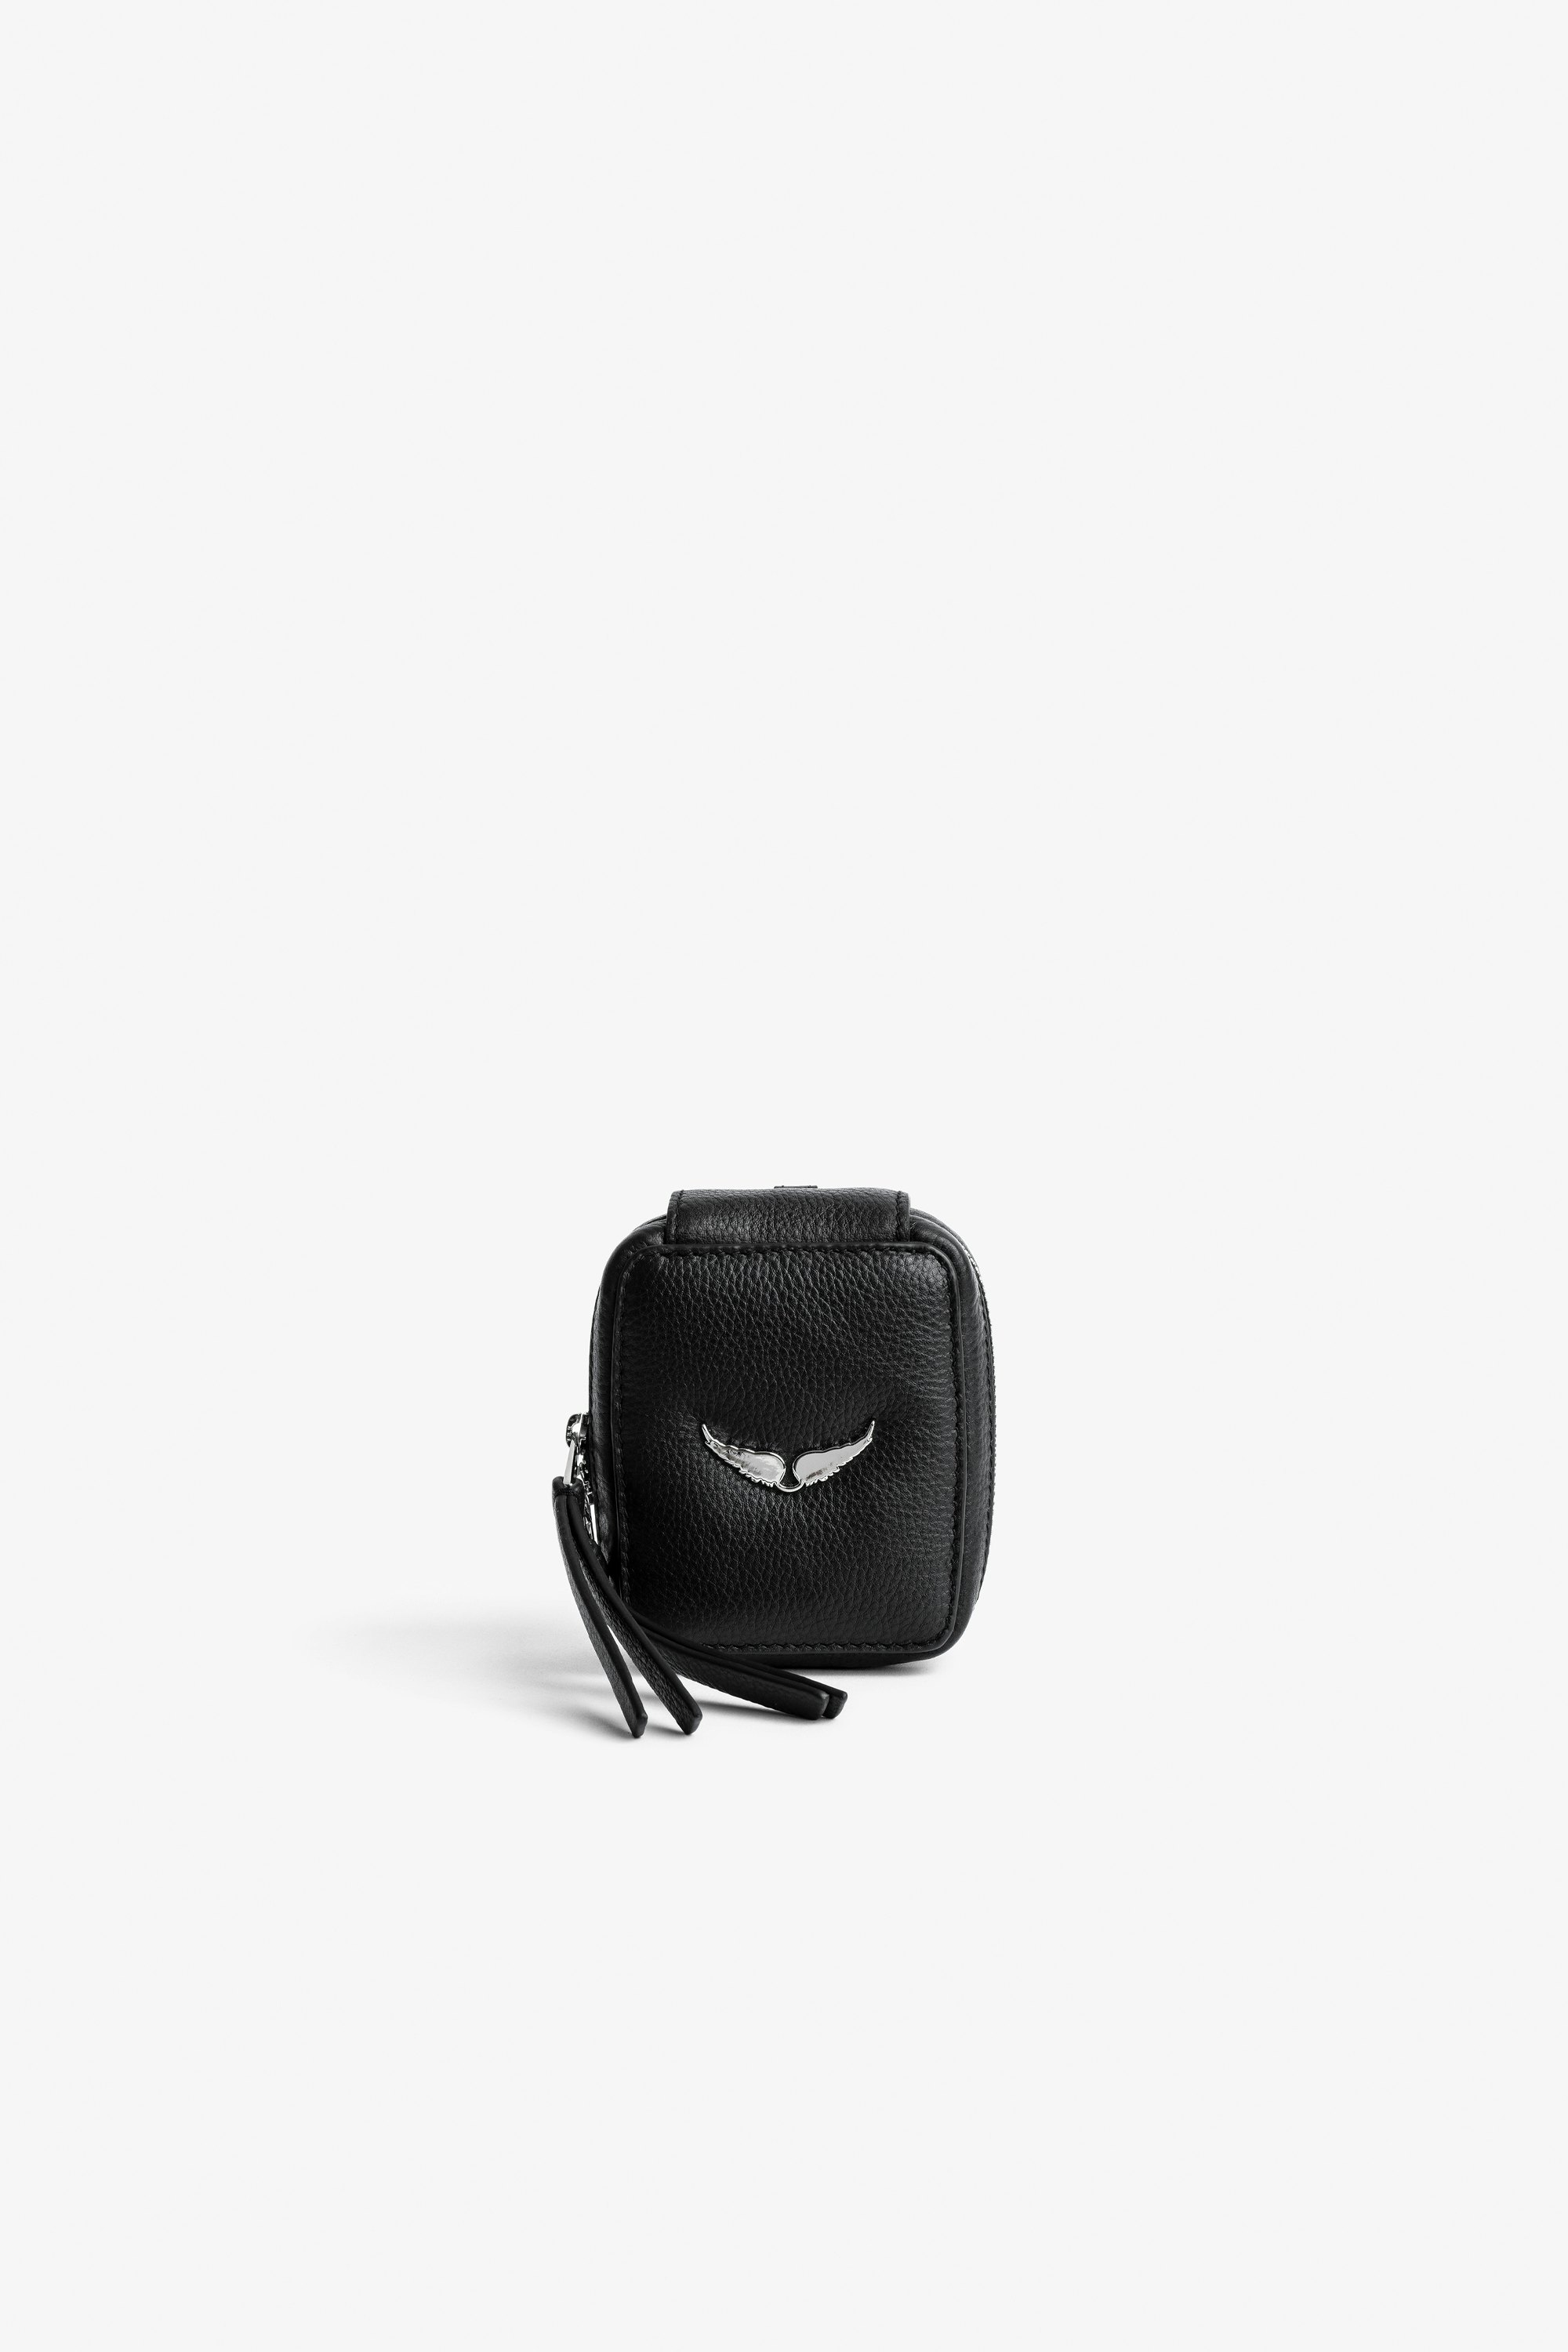 Swing Your Wings clutch - Women’s black grained leather clutch with Swing Your Wings charm.